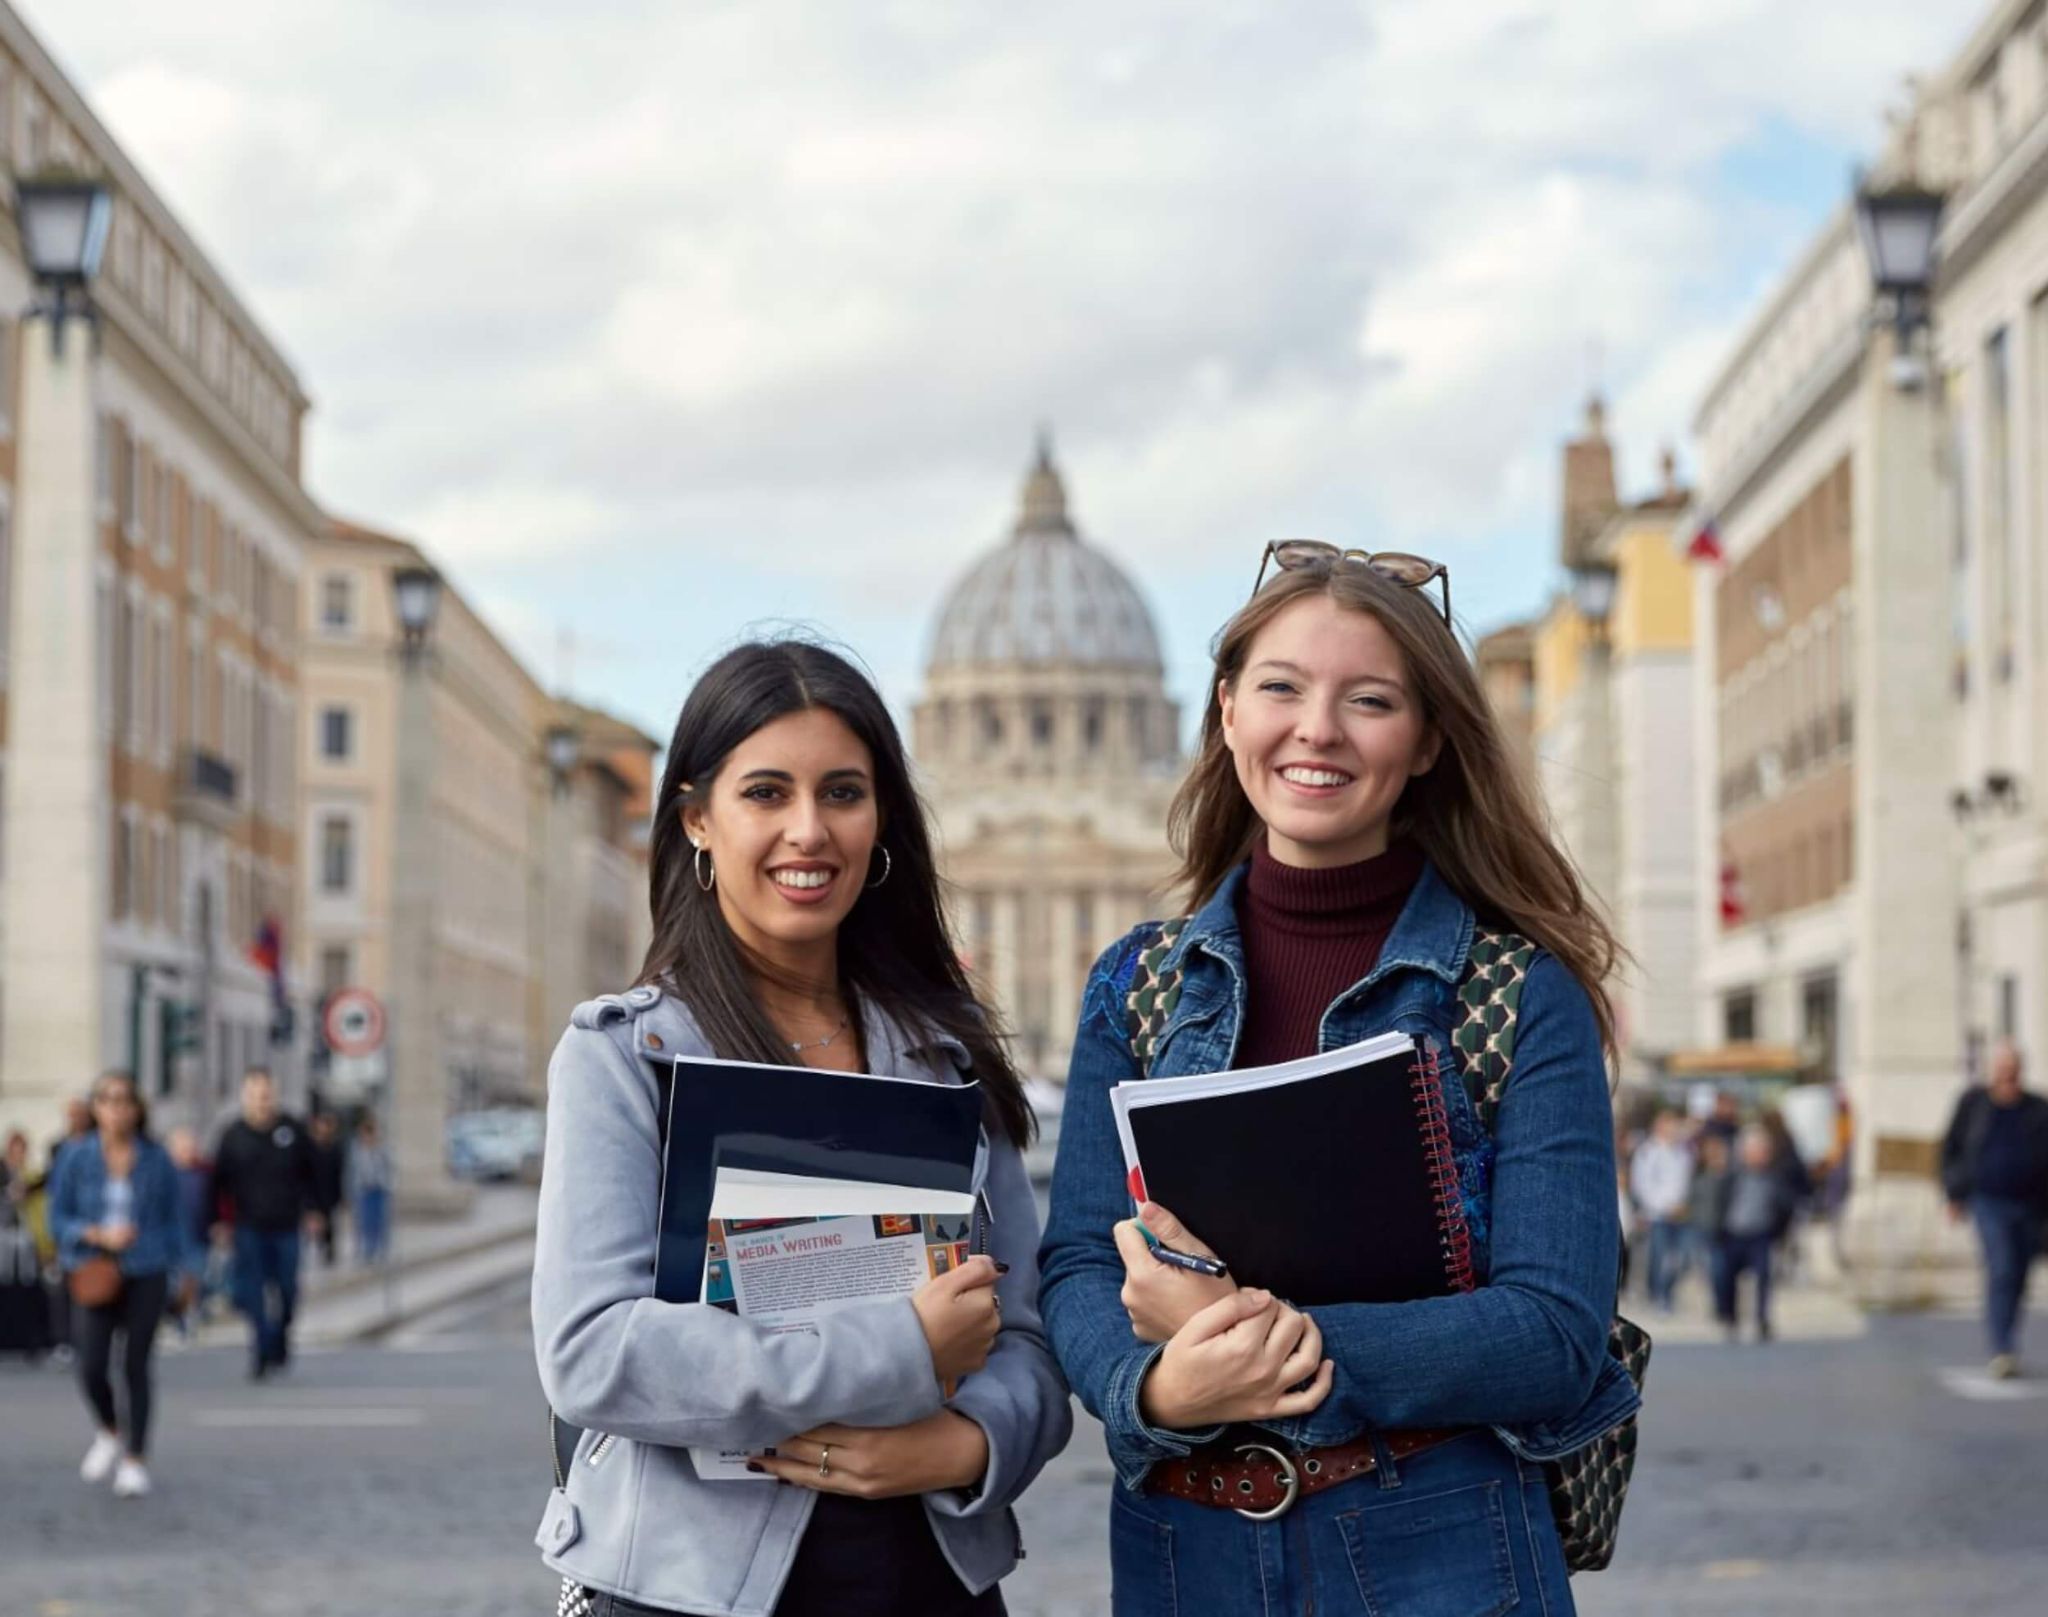 students attending university in Rome holding books and posing in front of a monument